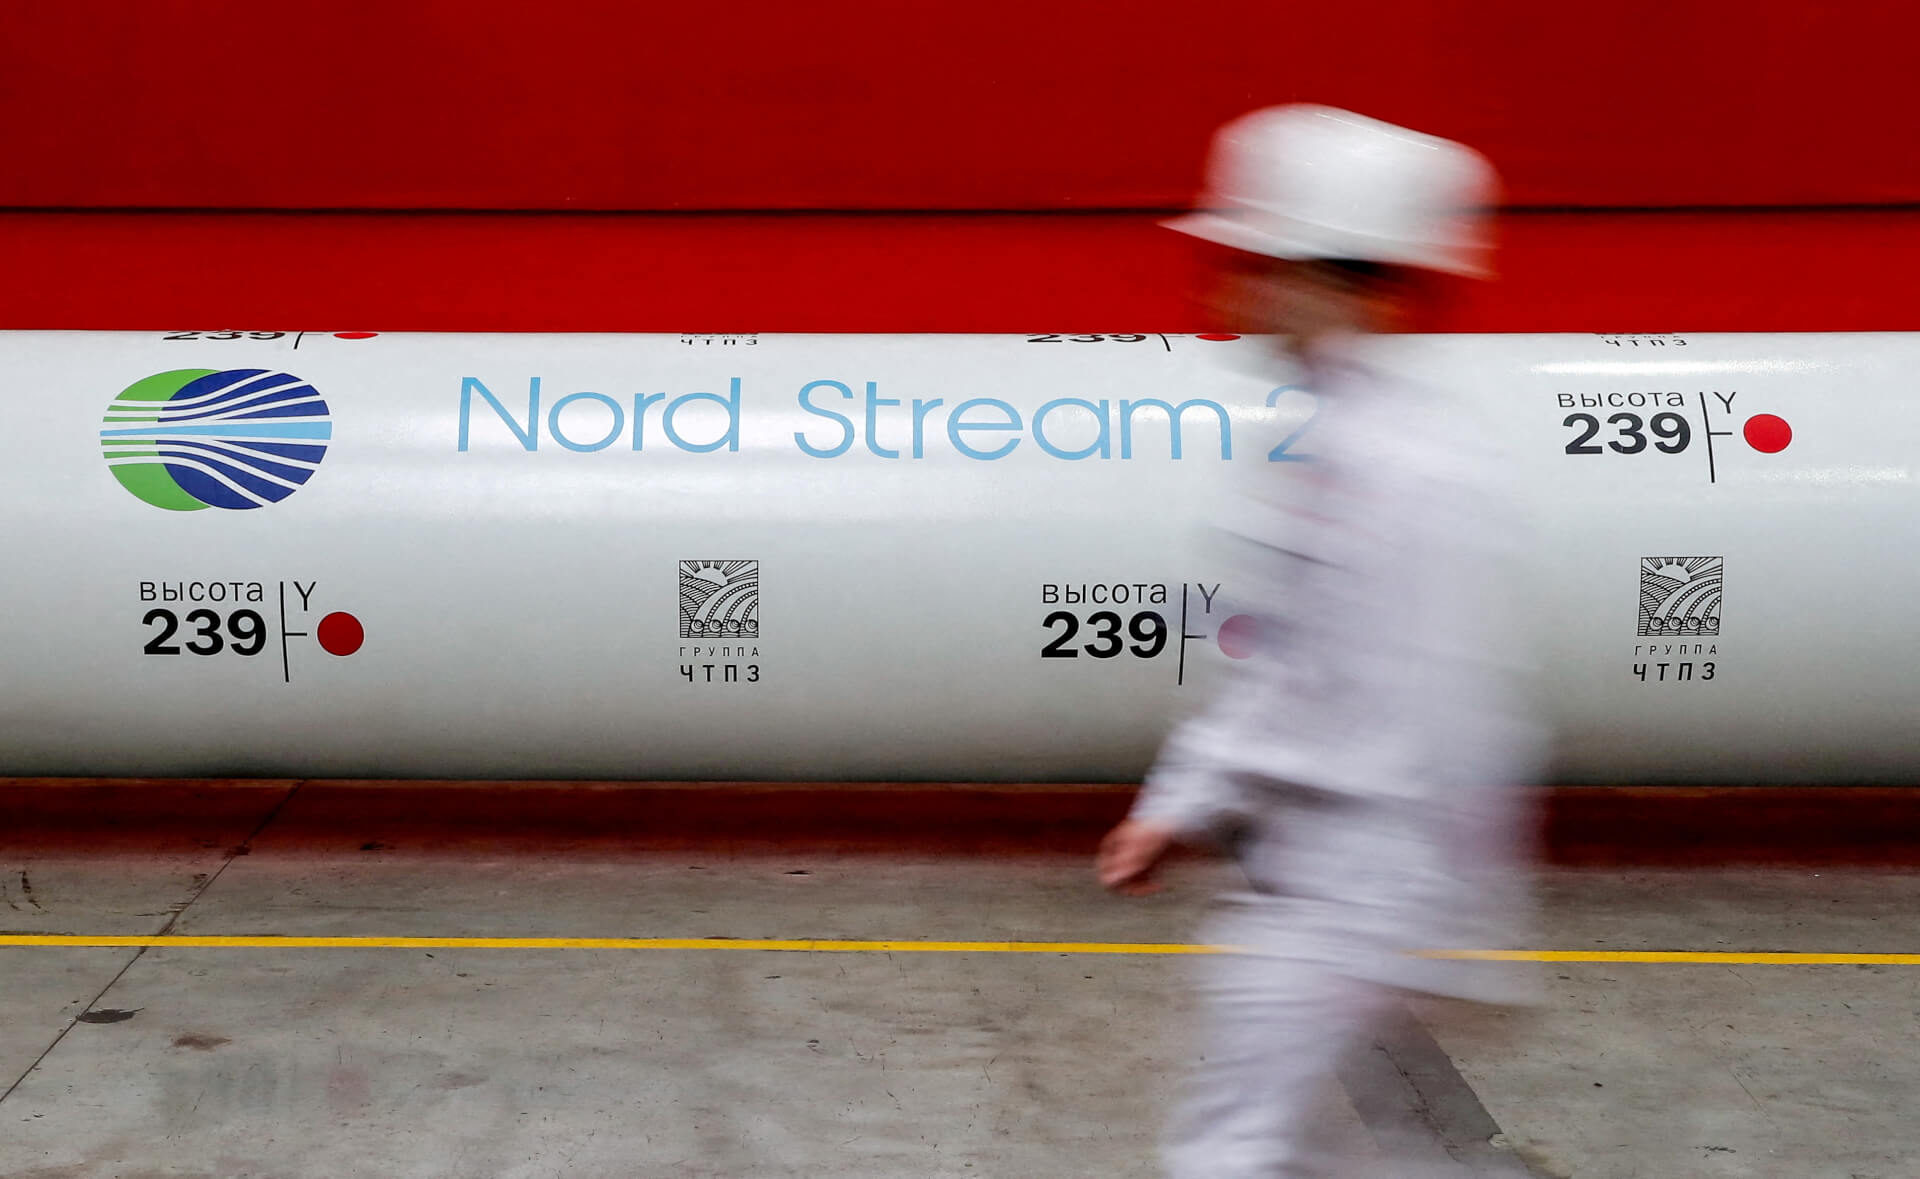 Putin Says Nord Stream 2 Ready for Operation, Claims It Will Lower Gas Prices In Europe